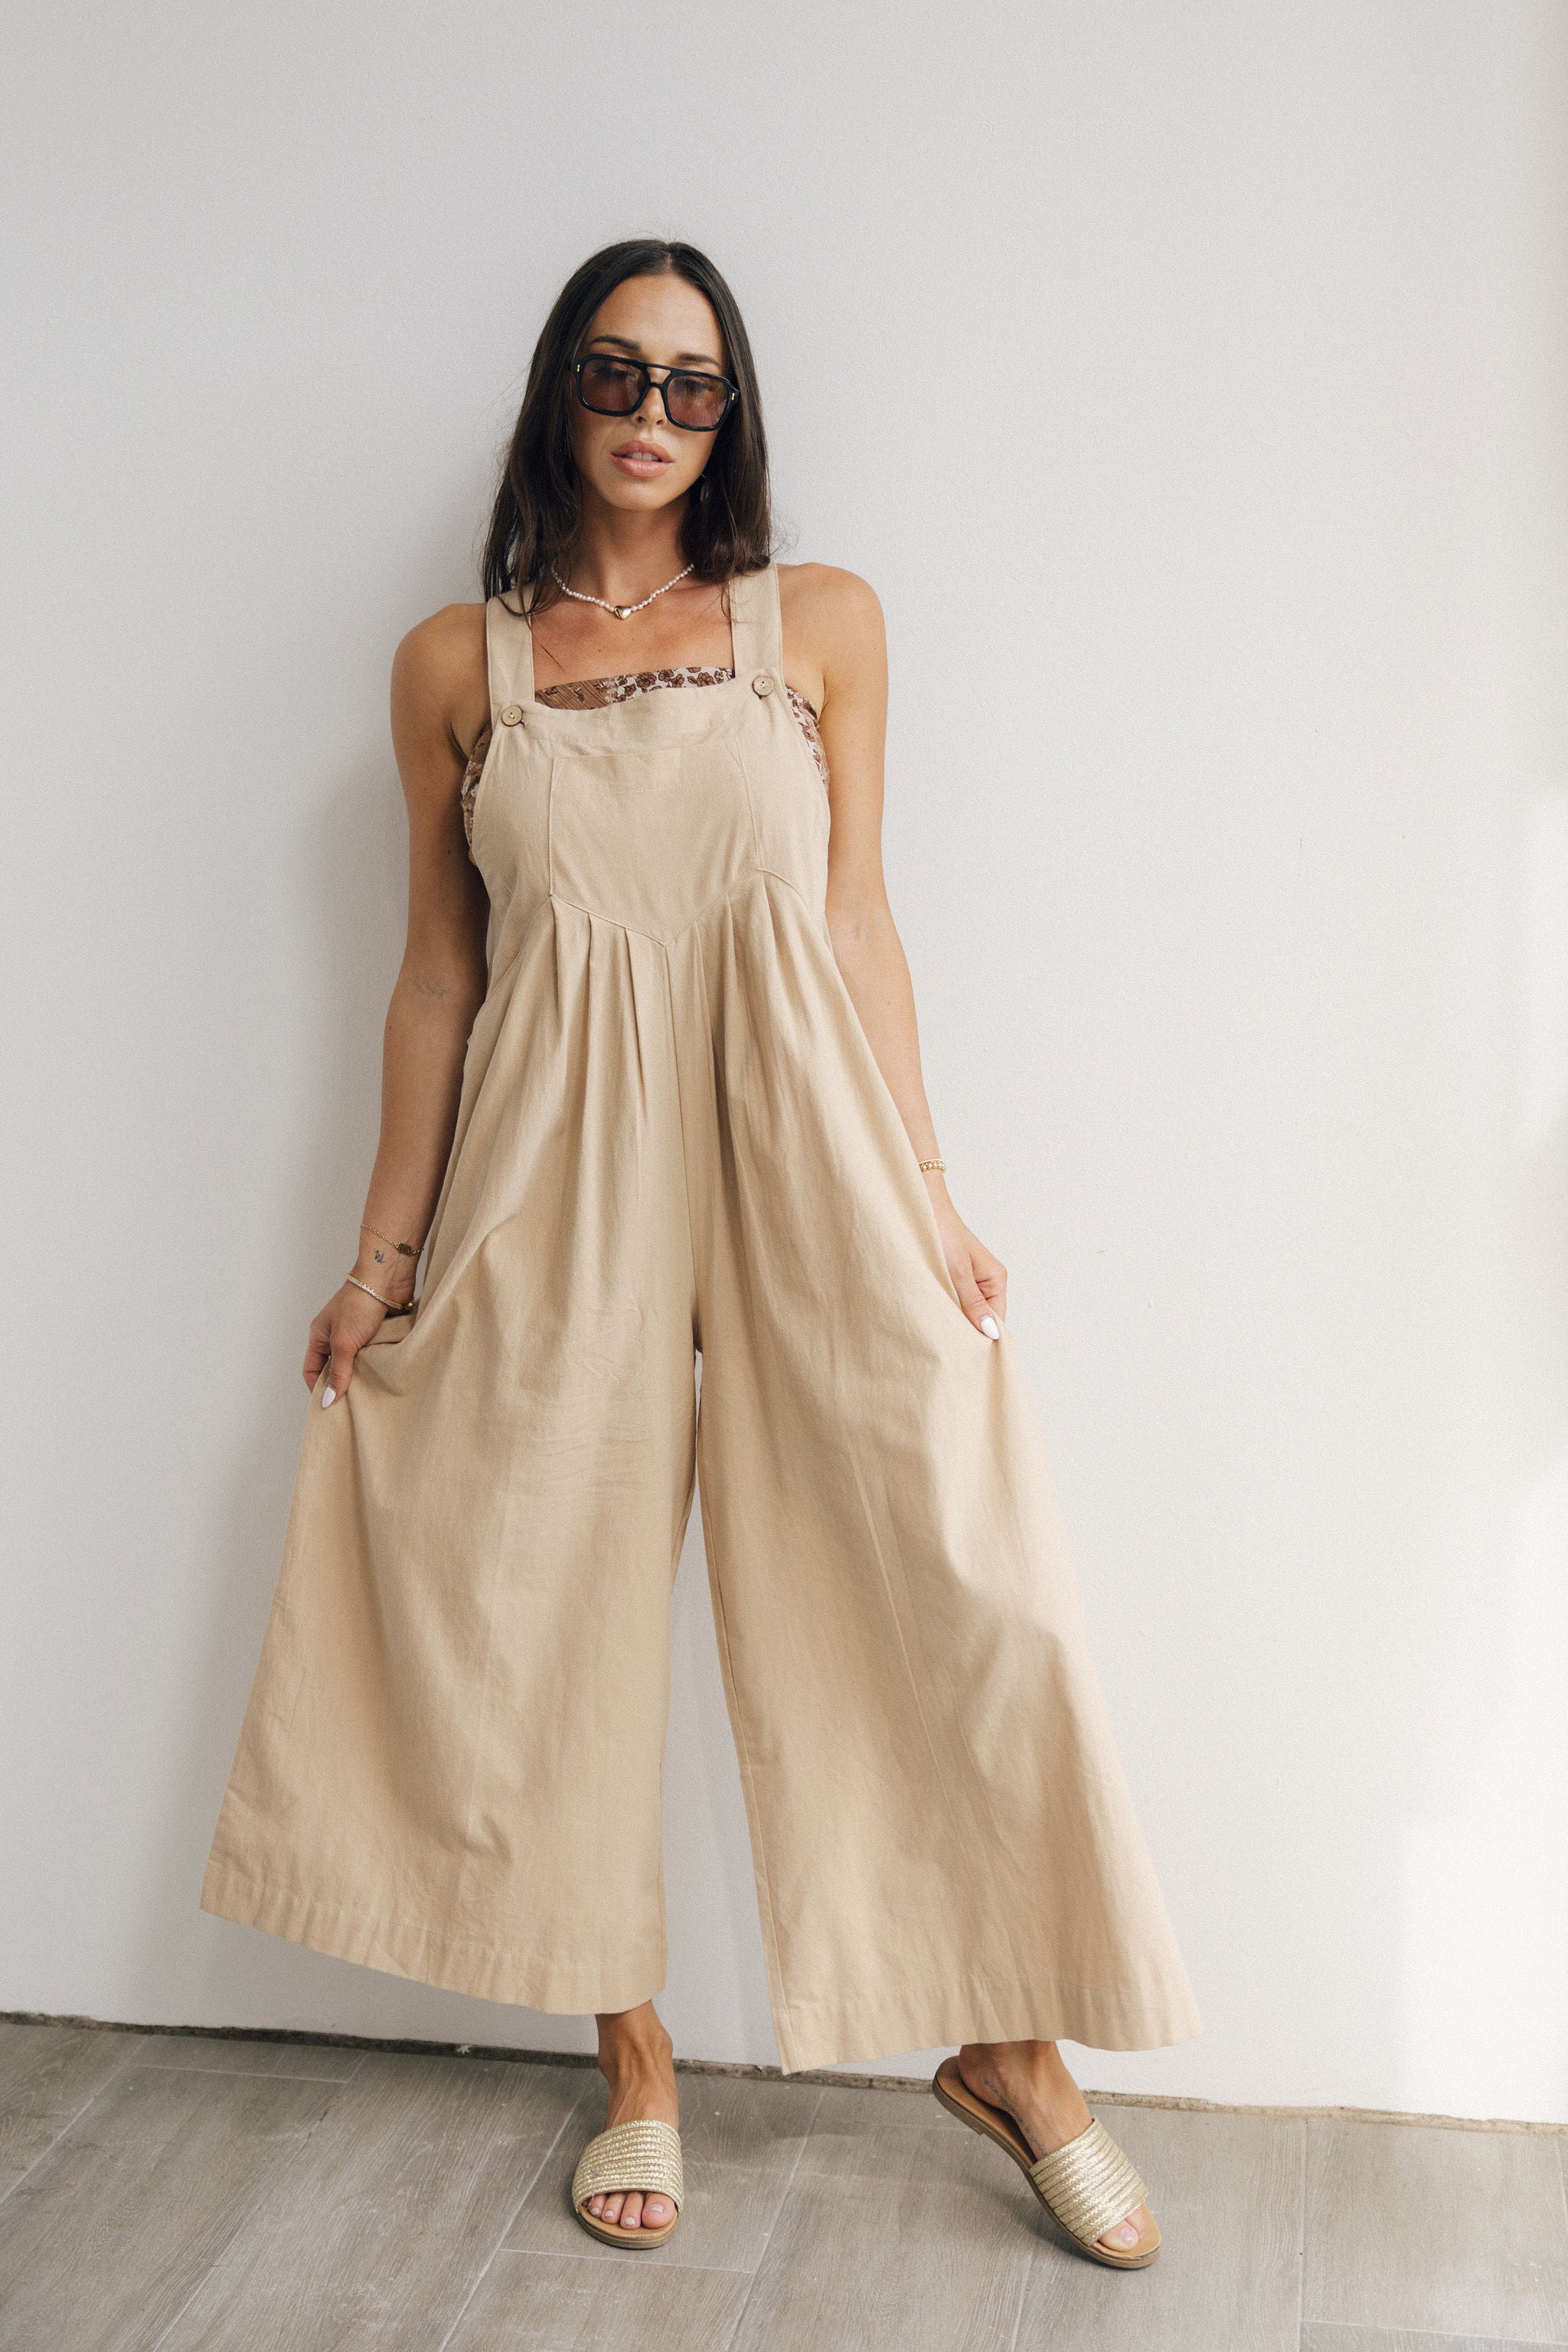 Full body front view of female model wearing the Calista Tan Wide Leg Jumpsuit that has tan fabric, straps that button, and wide legs. Worn over tube top.